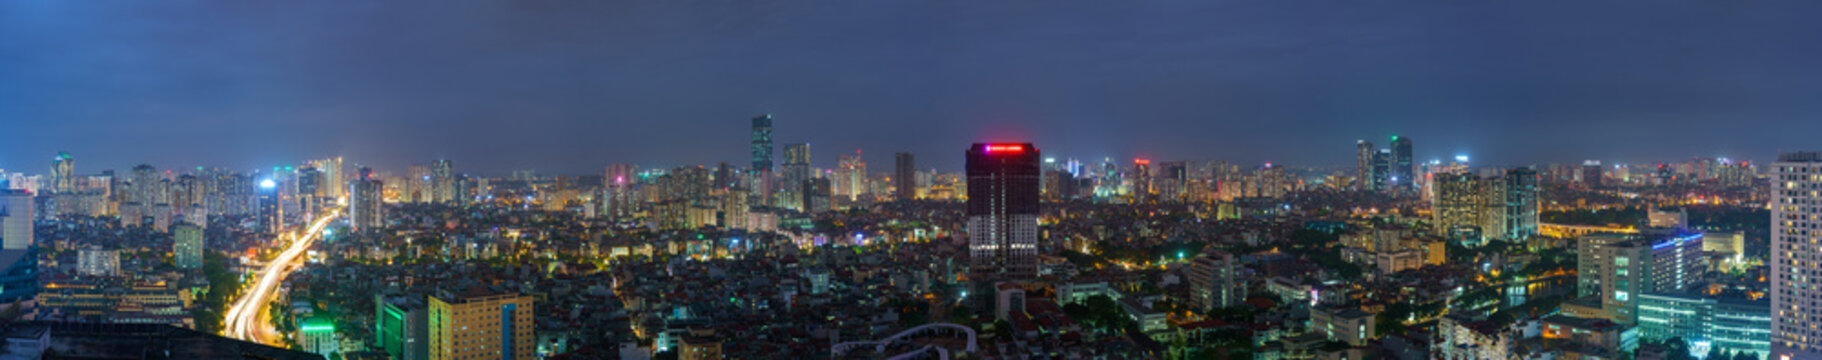 Cityscape of Hanoi skyline at Nguyen Chi Thanh street, Dong Da district during sunset time in Hanoi city, Vietnam in 2020 © Hanoi Photography